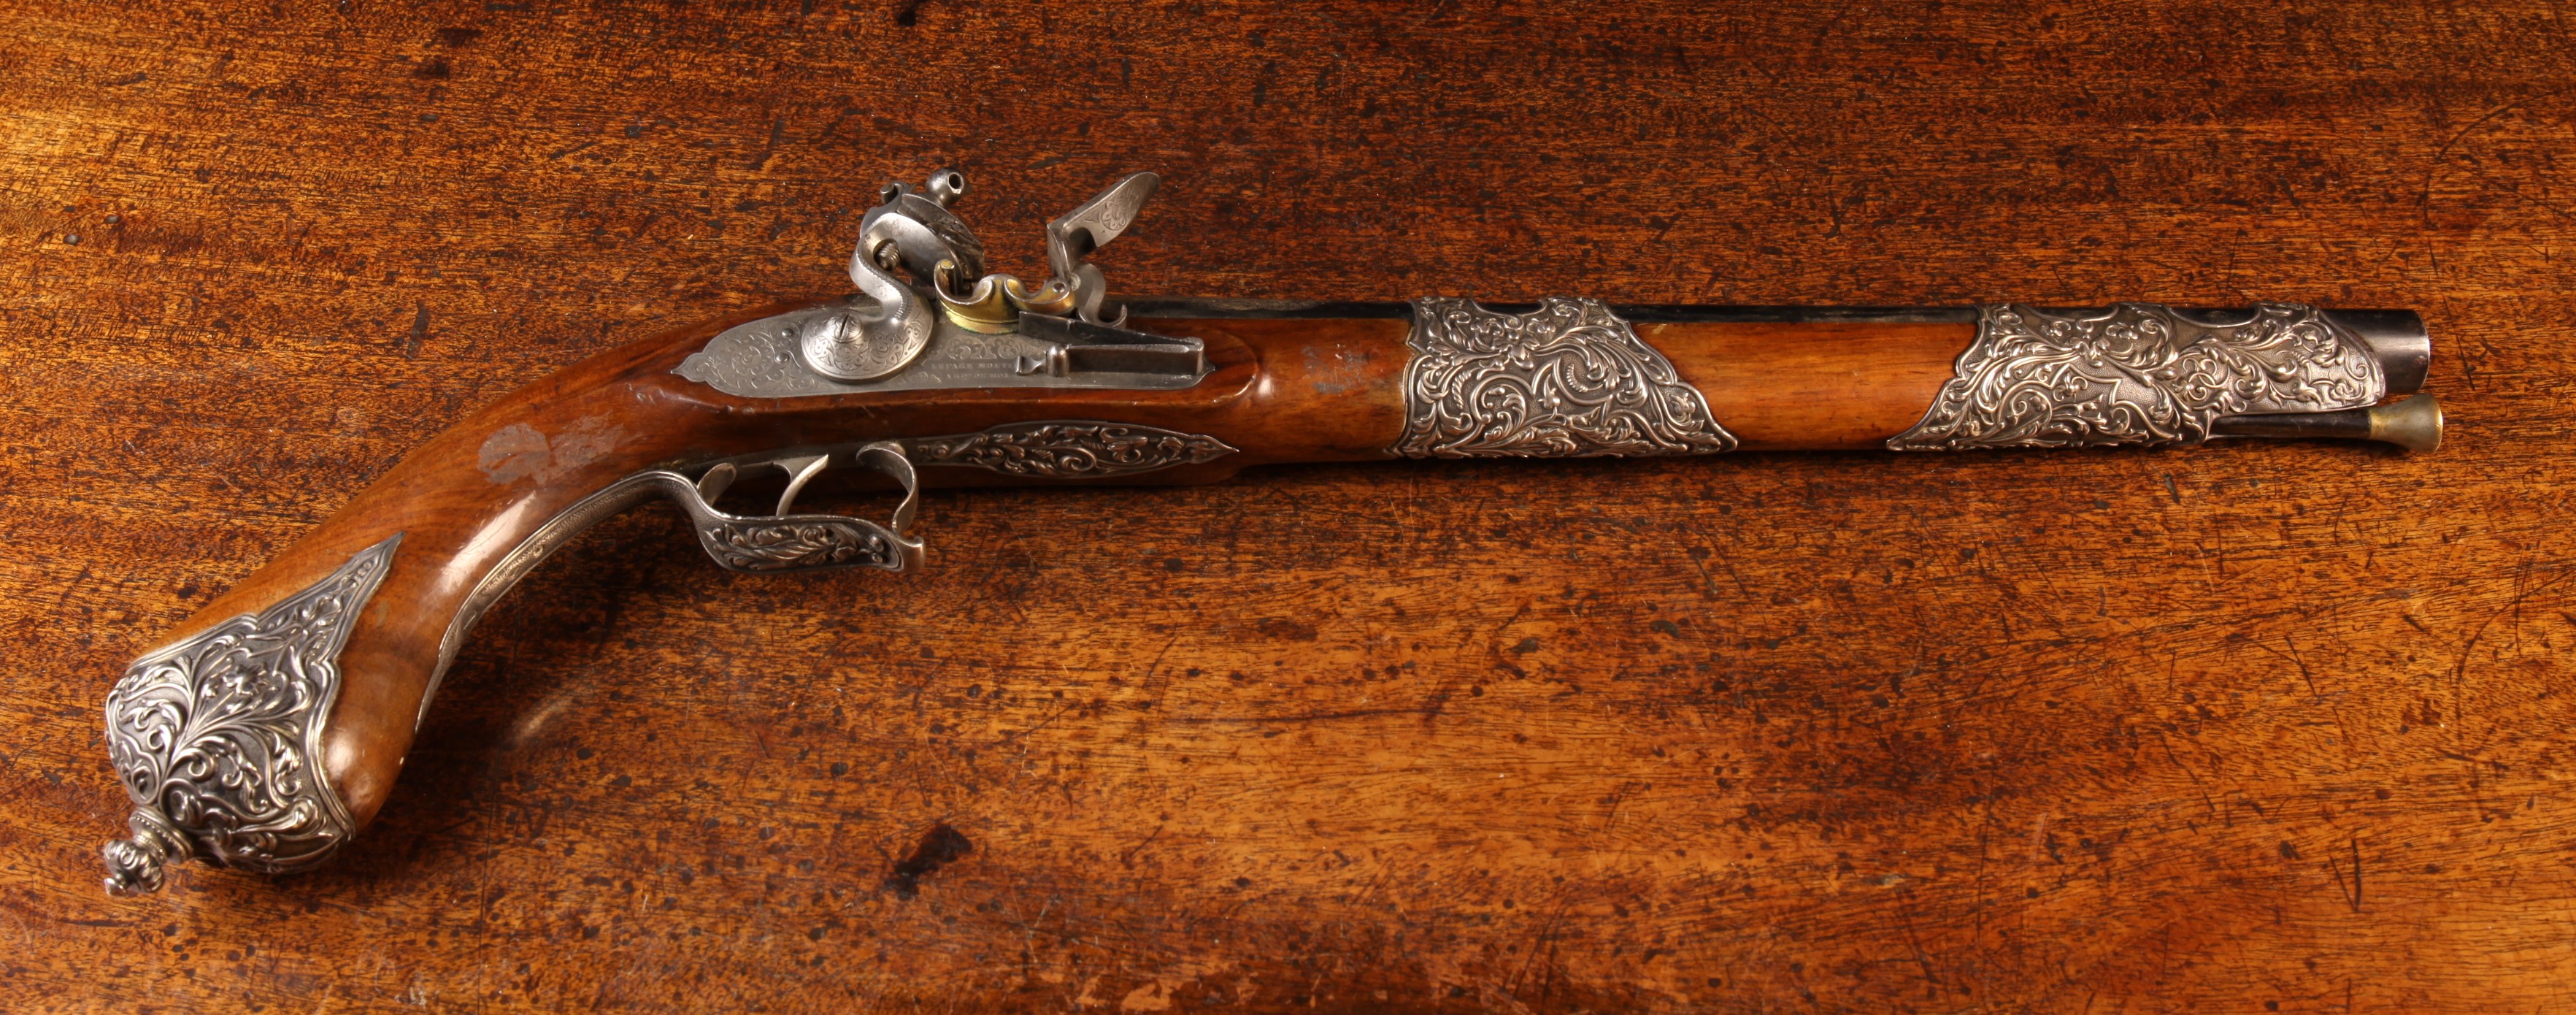 A Large Early 19th Century French Flintlock Pistol made for the North African Market. - Image 4 of 7